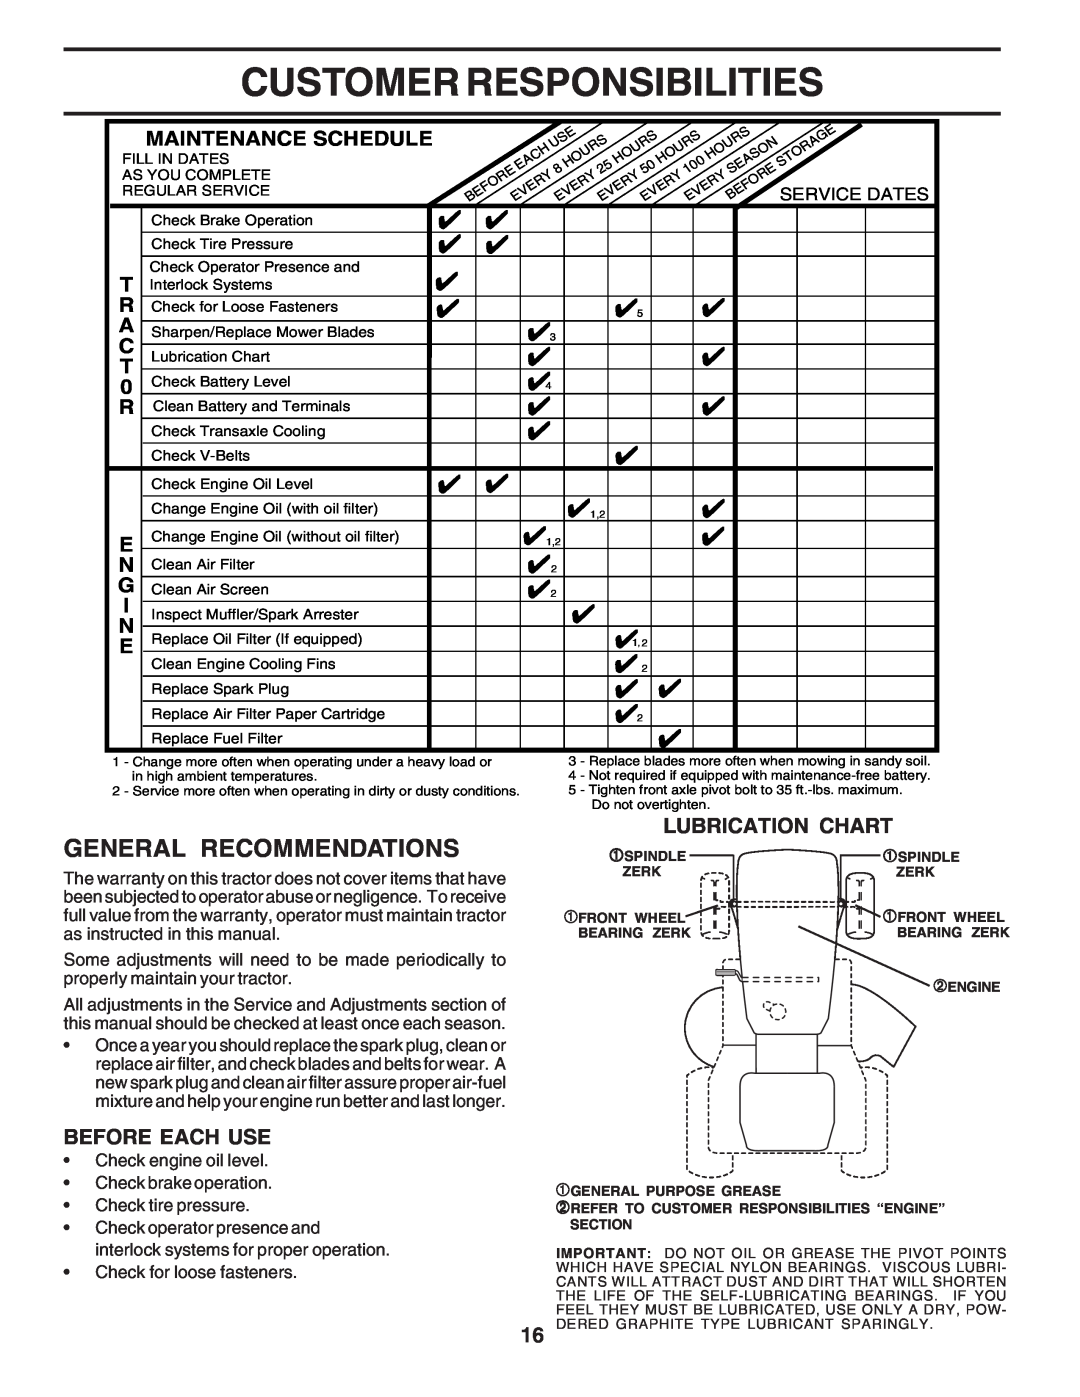 Poulan PPR20H42STB owner manual Customer Responsibilities, General Recommendations, Lubrication Chart, Before Each Use 